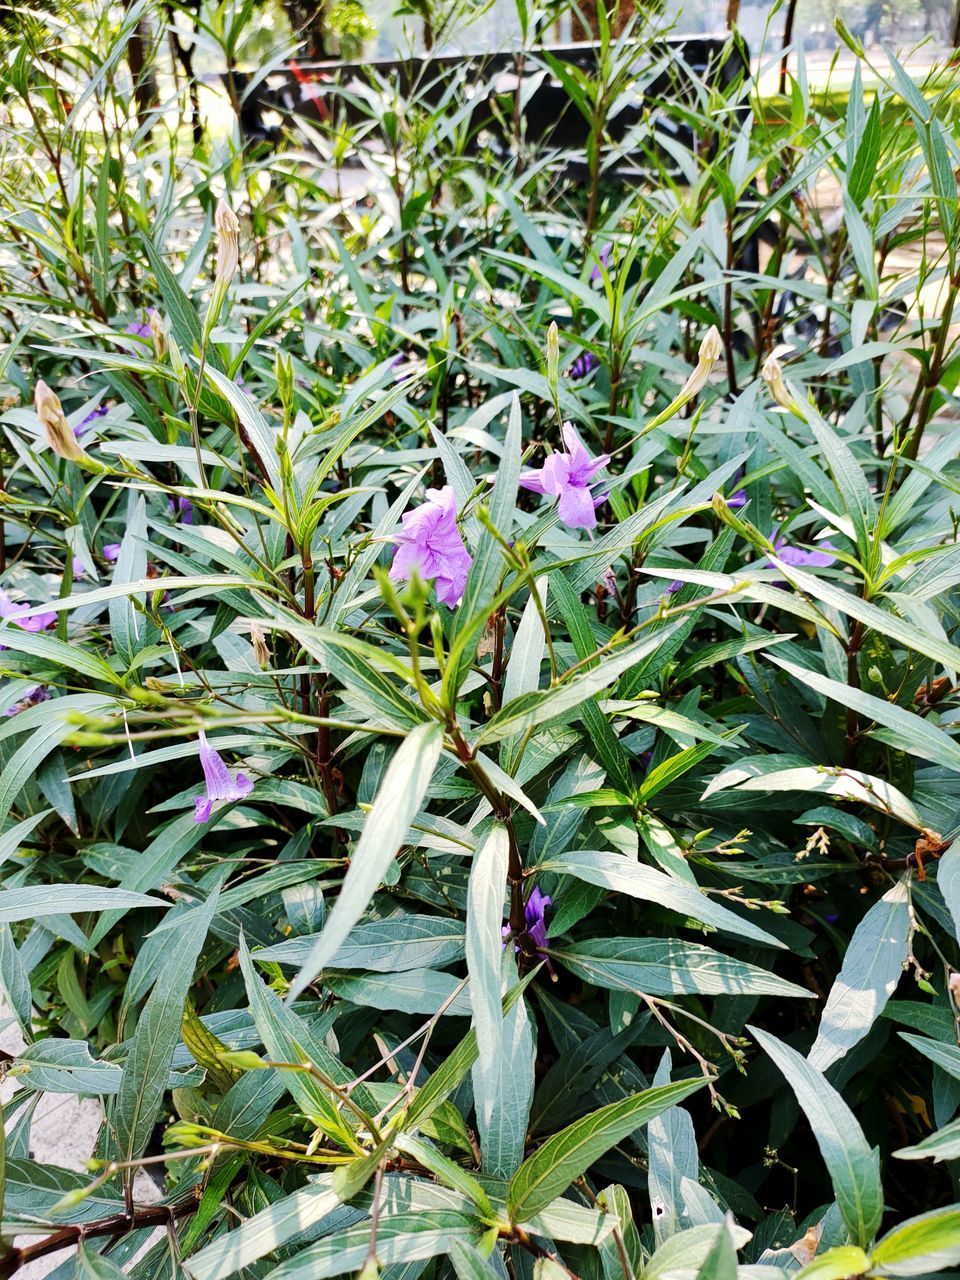 CLOSE-UP OF PURPLE FLOWERING PLANT ON FIELD